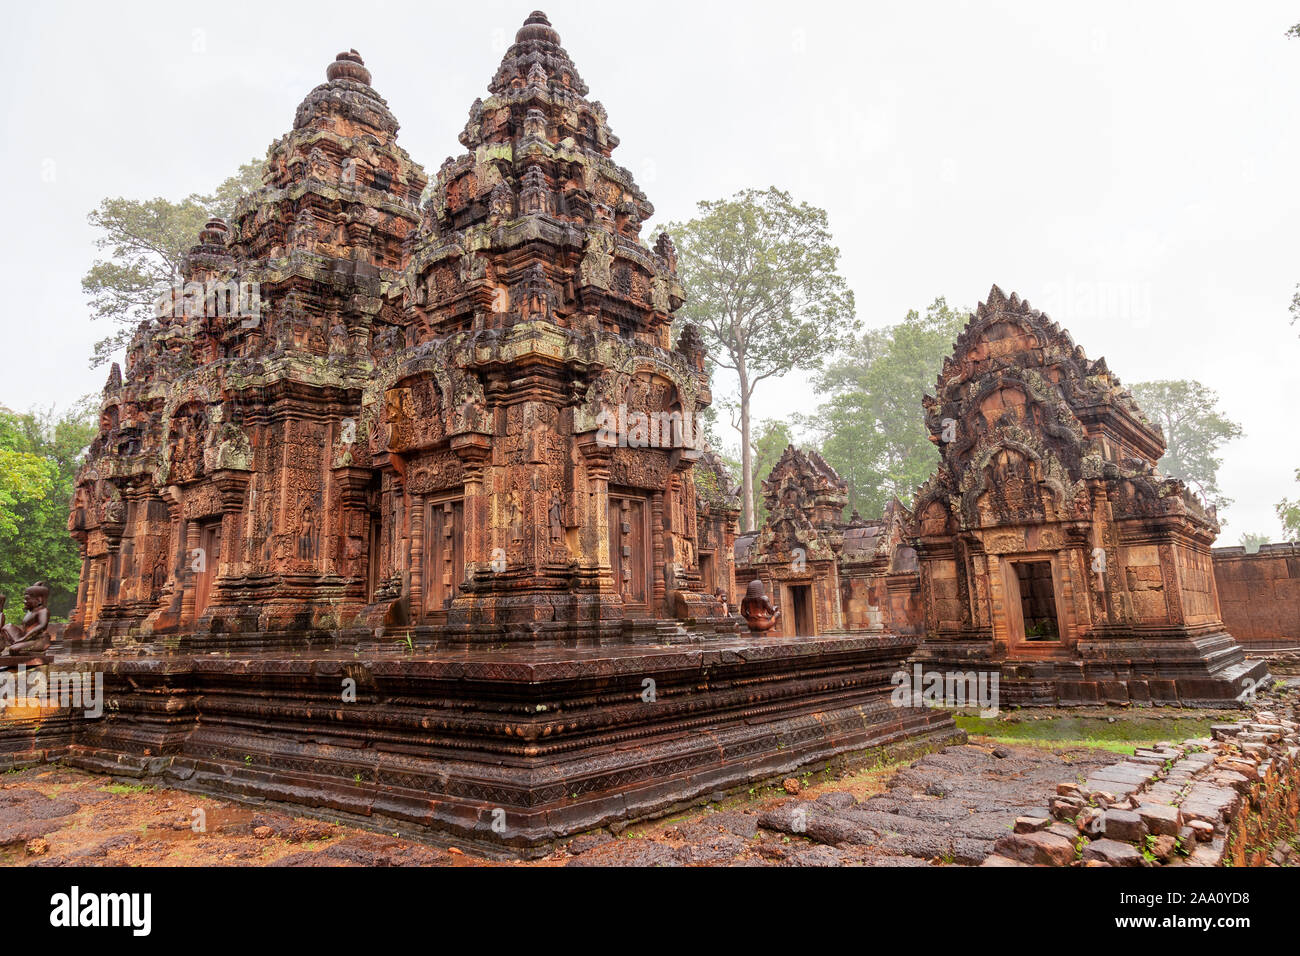 Temple of Banteay Srei. This temple is famous for the fine and detailed carvings and also for the monkeys. Even in tropical rain this temple is very c Stock Photo